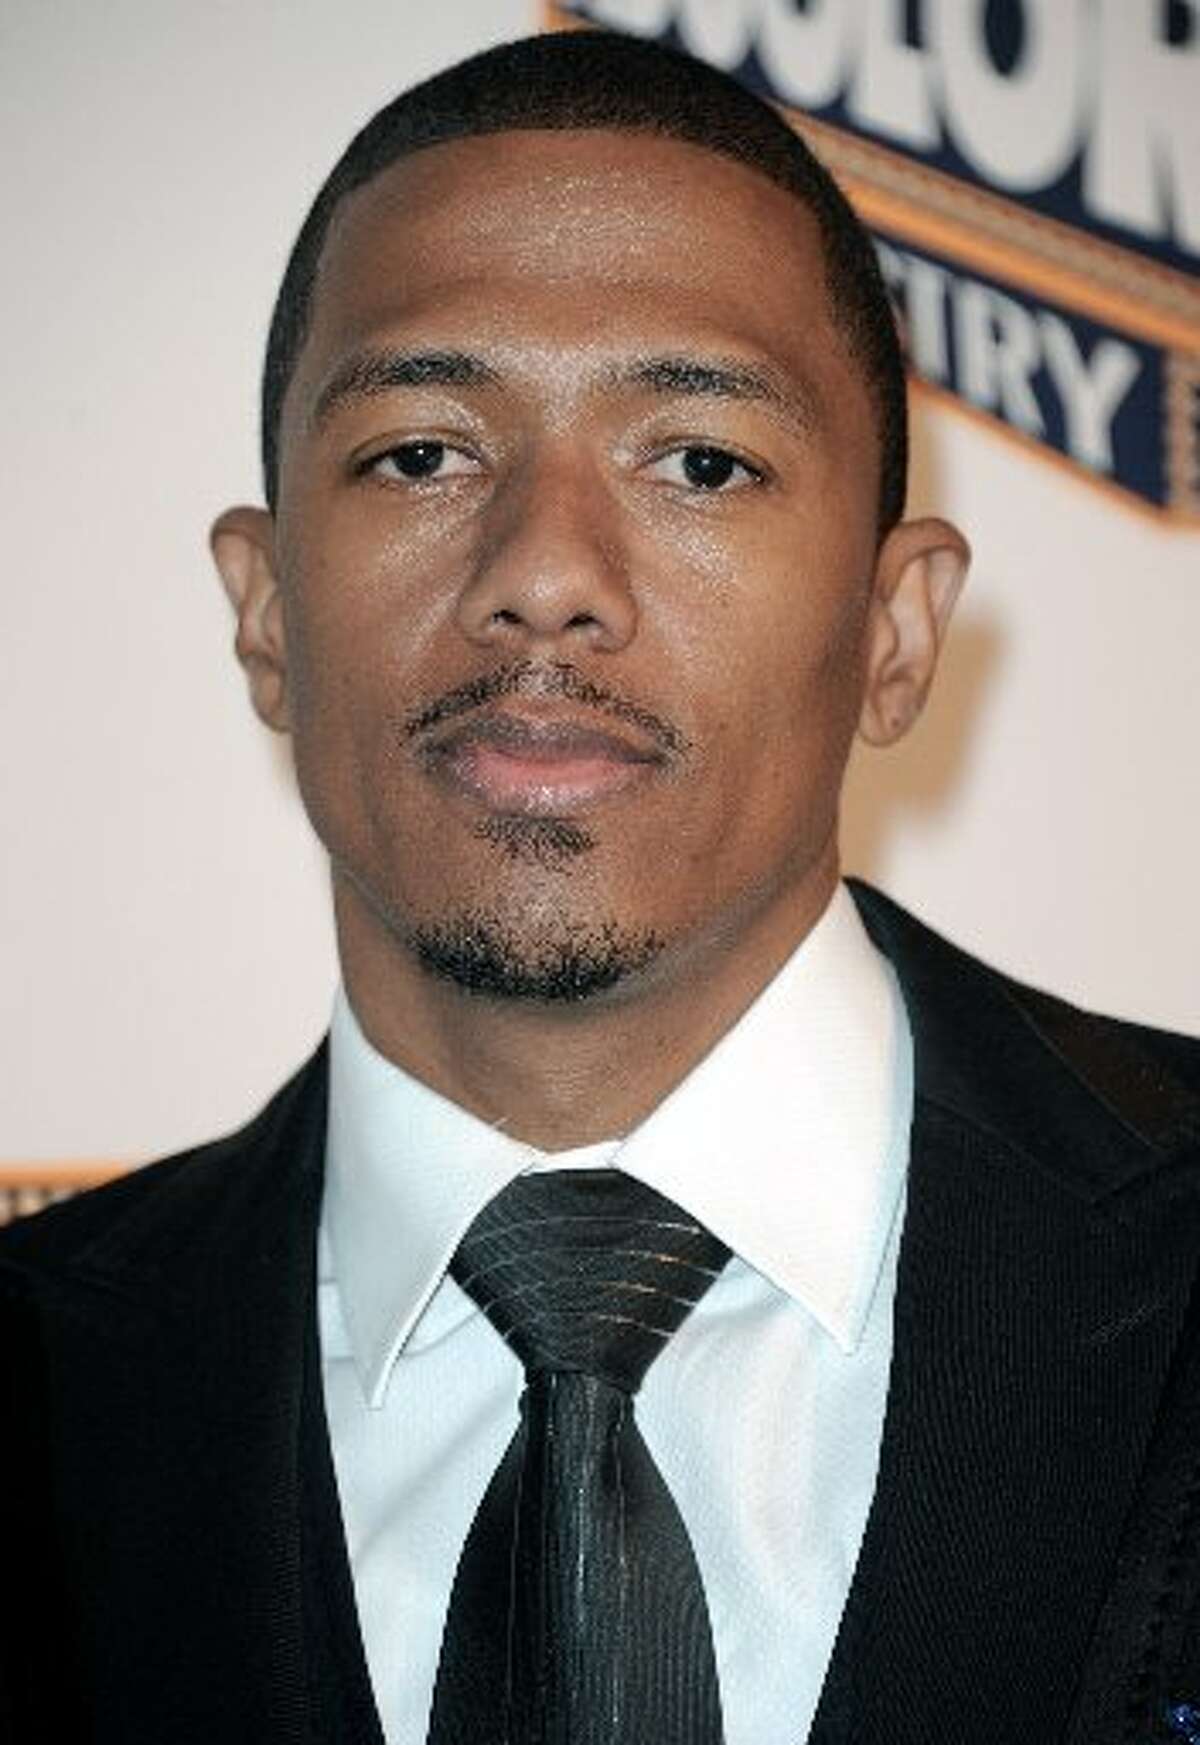 Nick Cannon starred in "The Nick Cannon Show" on Nickelodeon in 2002.  He has moved on to a variety of projects since then, including hosting "America's Got Talent."